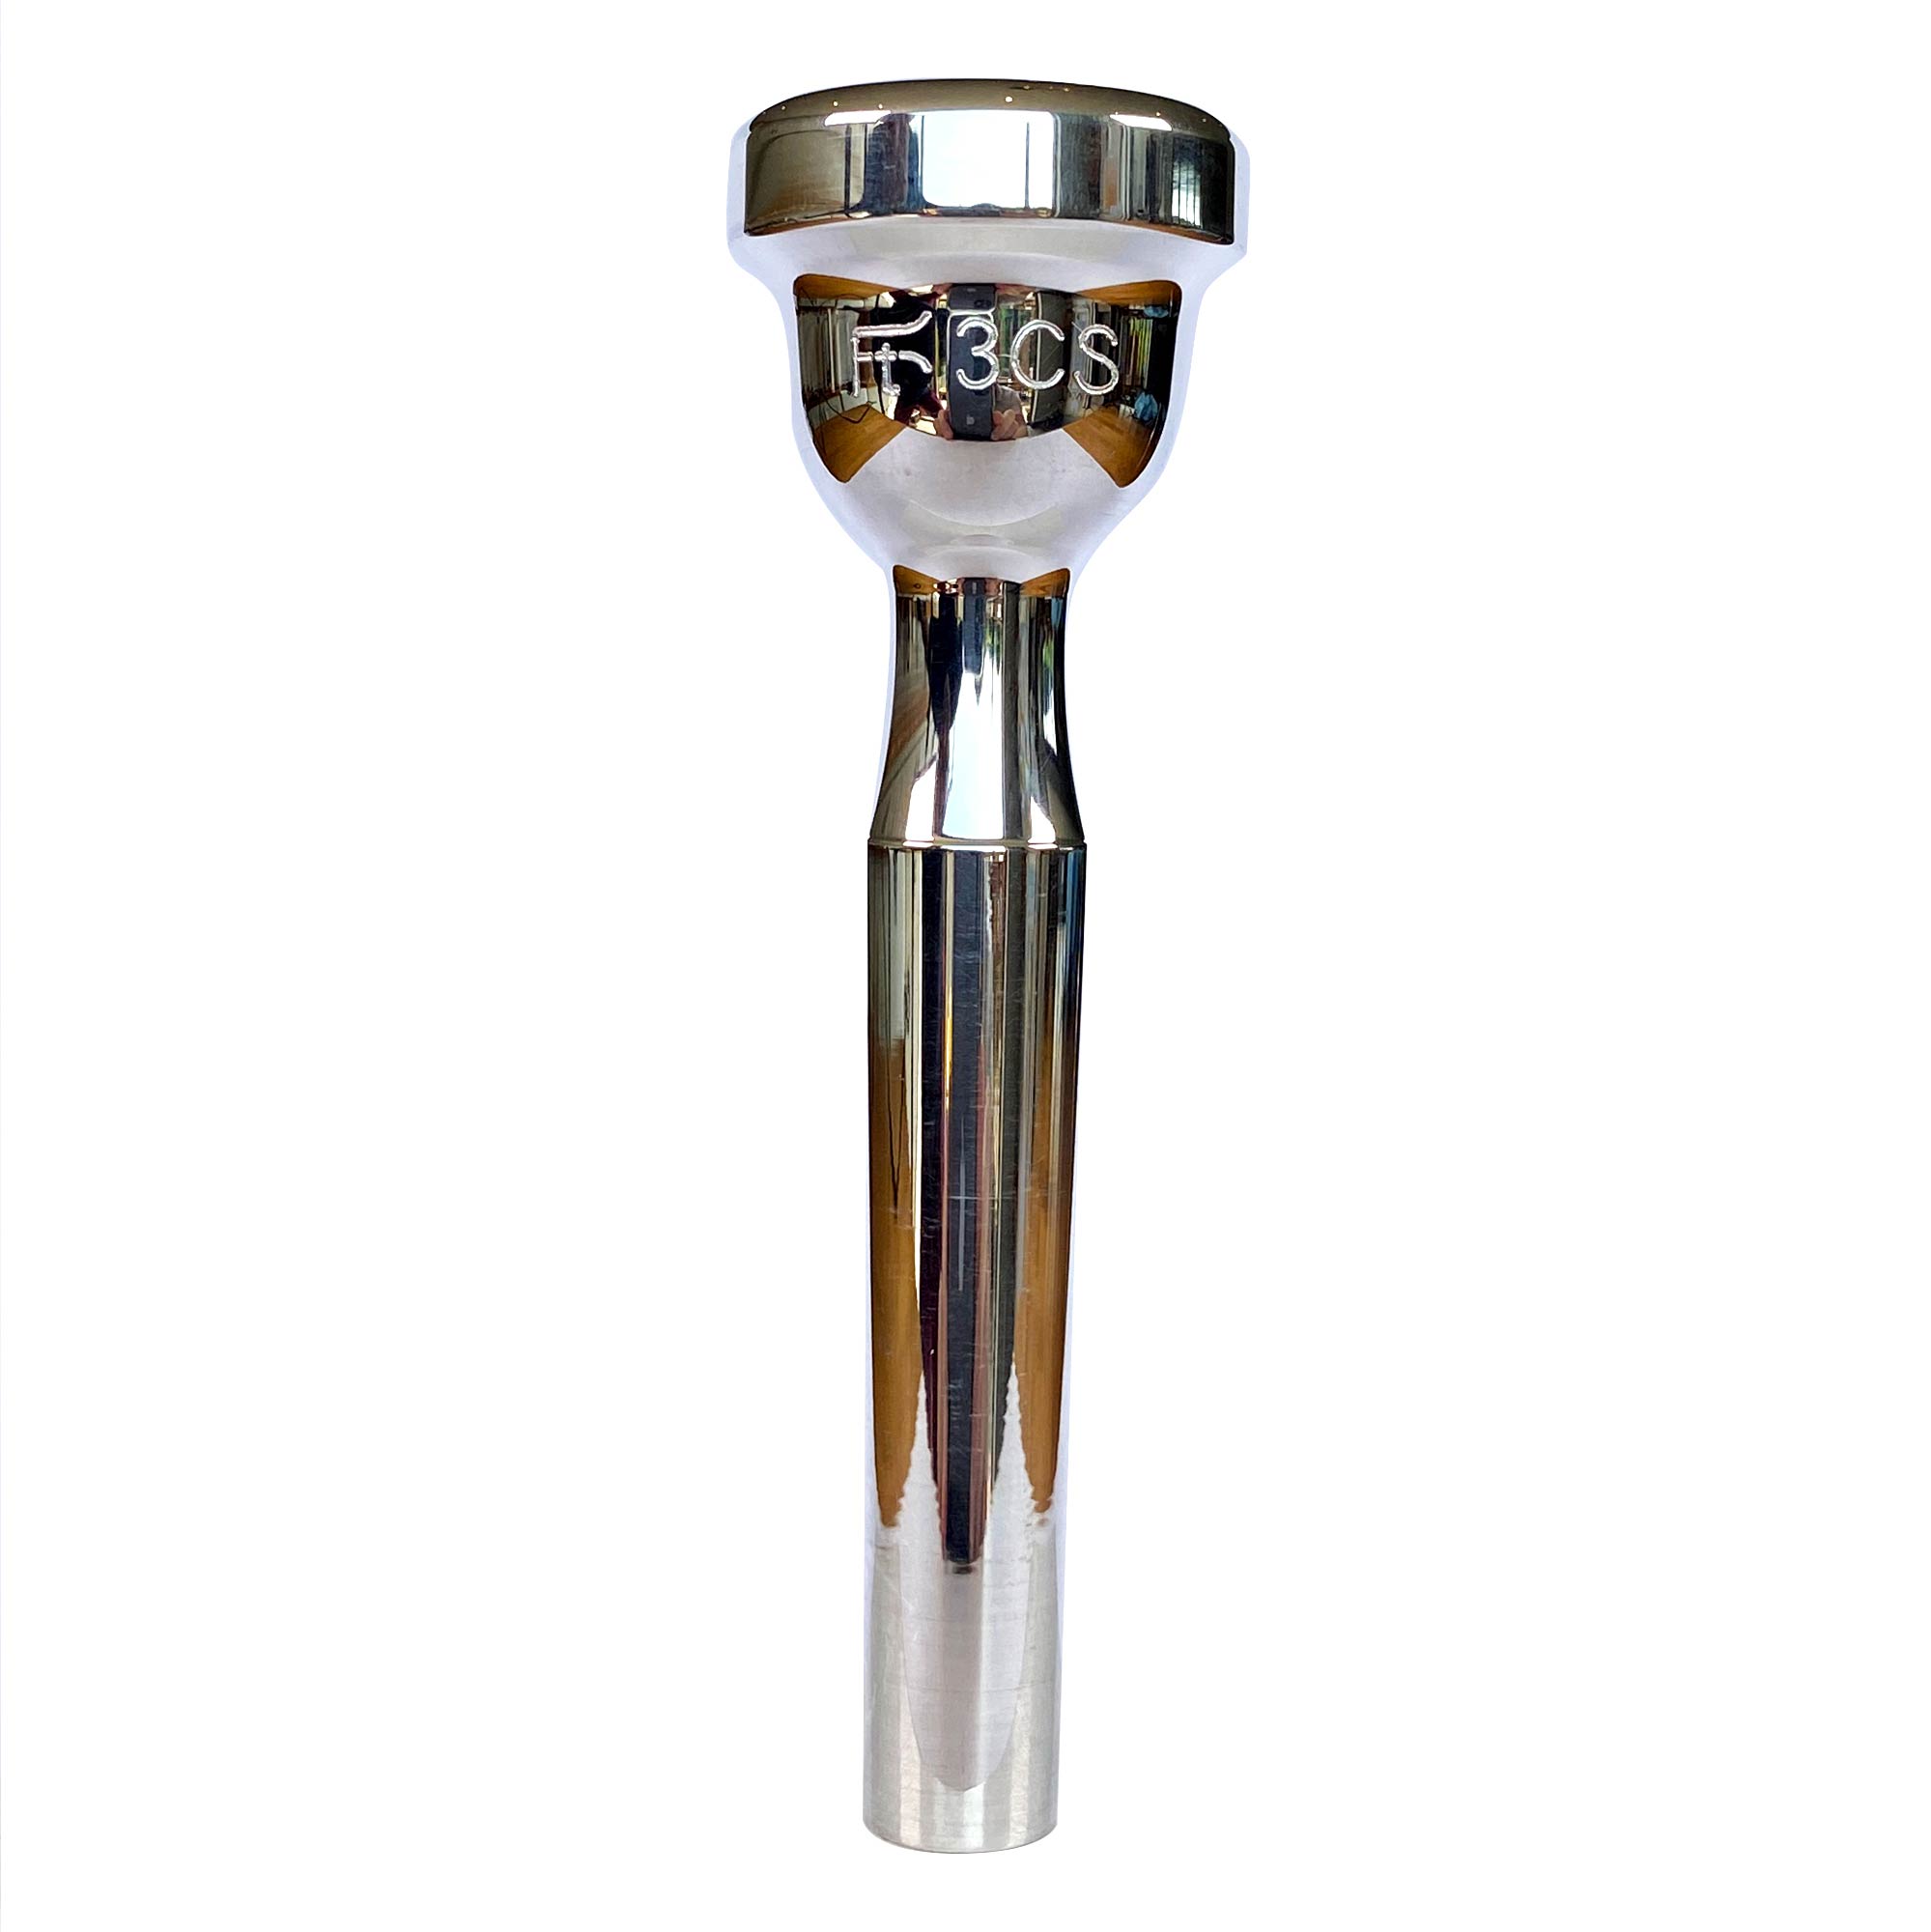 Fultone Brass - Ft Series Mouthpieces - Classic Series - Ft 3 CS Mouthpiece